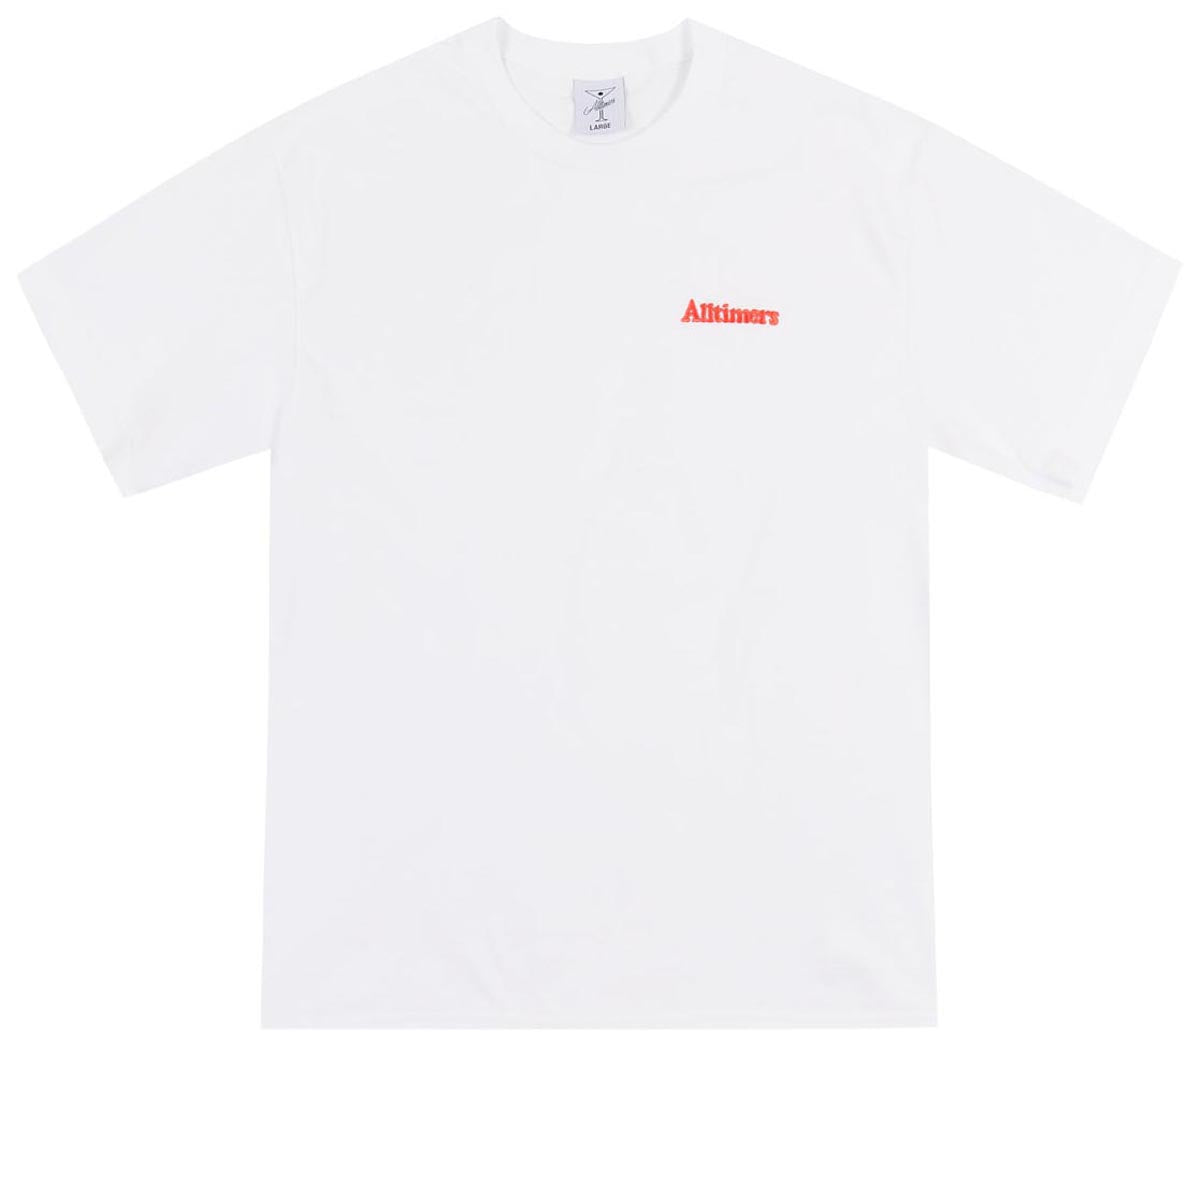 Alltimers Tiny Broadway Embroidered T-Shirt - White image 1